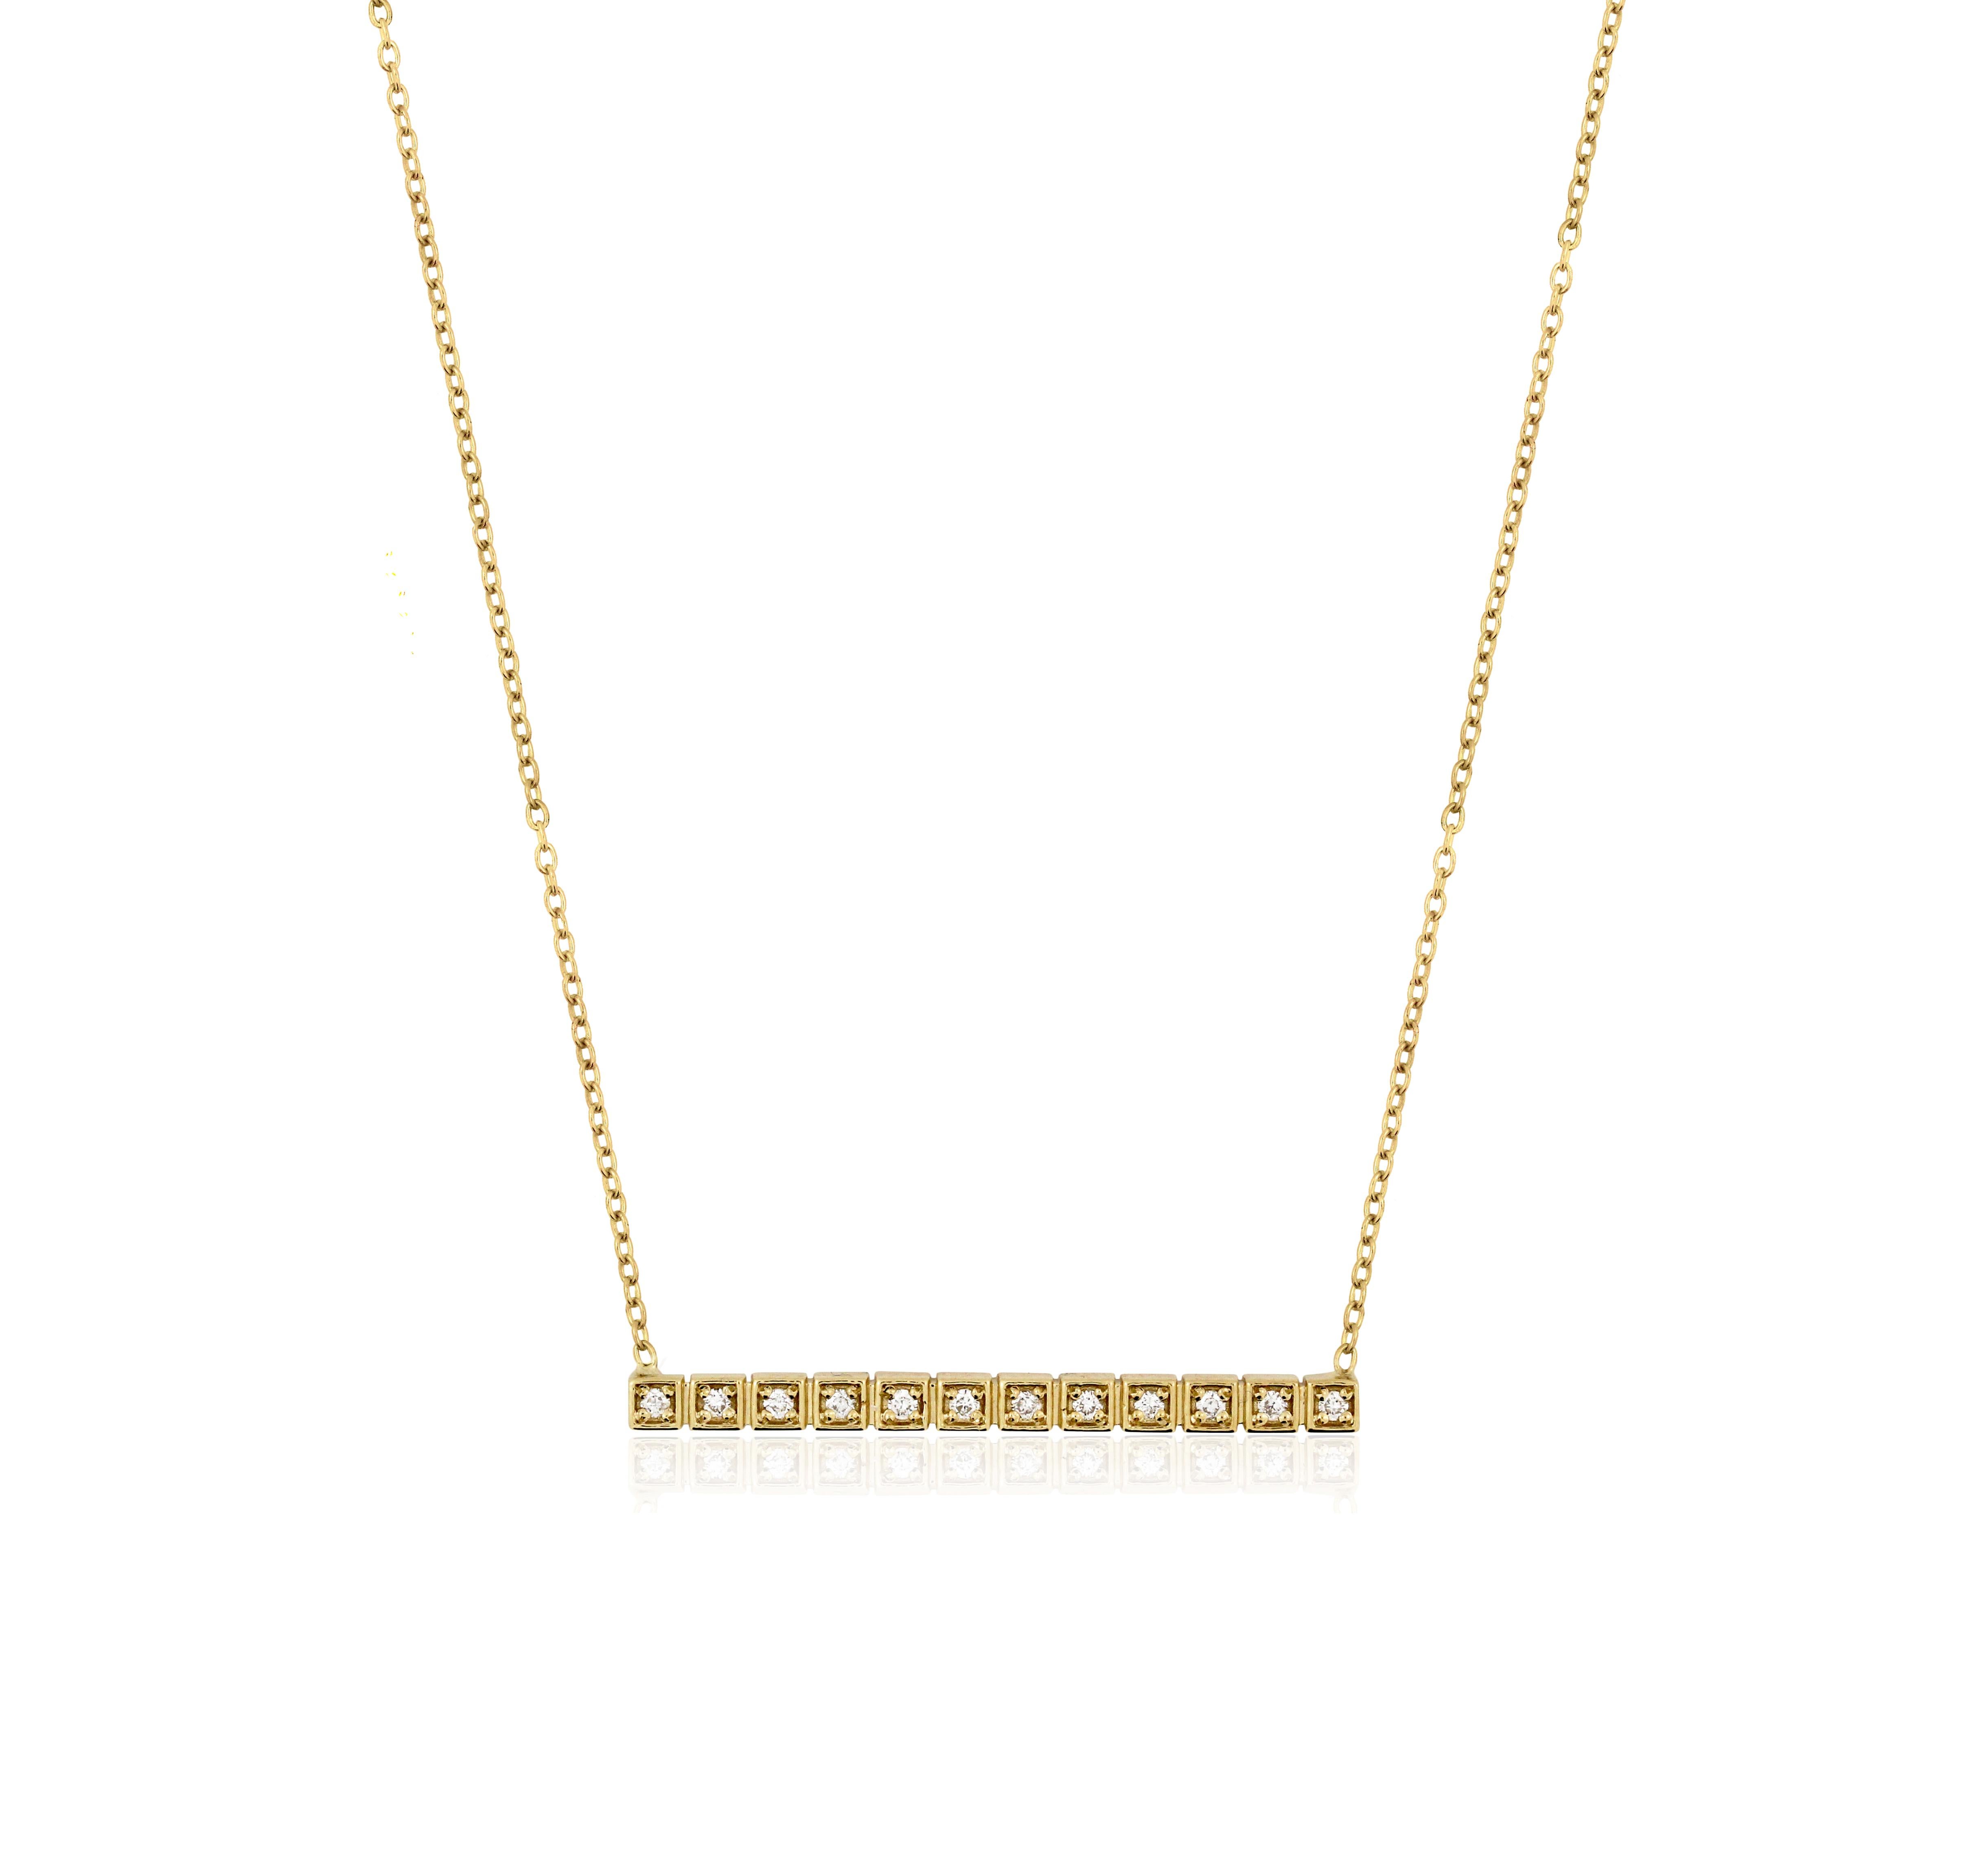 14K Yellow Gold and Diamond Straight Bar Pendant Necklace

0.11 carat G color, VS clarity diamonds (12 diamonds total)

3.30 grams 14K gold

Pendant is 1.2 inch length 

Chain is 17 inches in length with option to wear at 16 inches